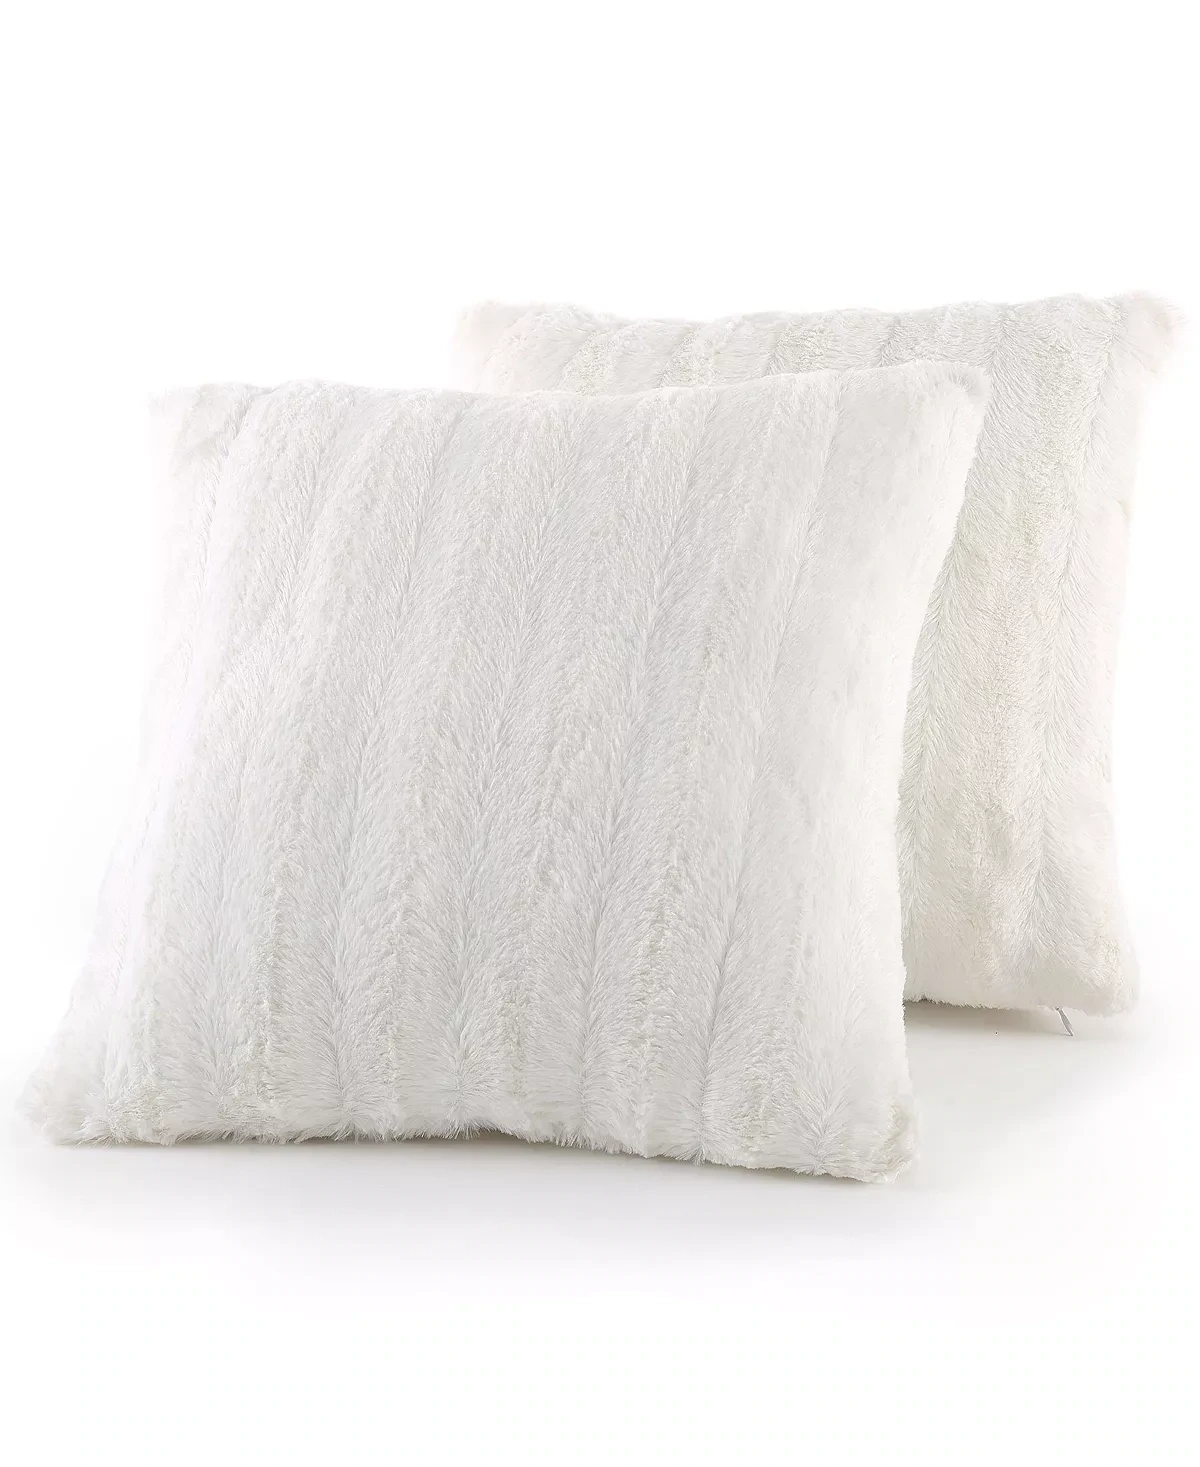 Cheer Collection Faux Fur Square Decorative Pillow 18x18 White - (Set of 2)